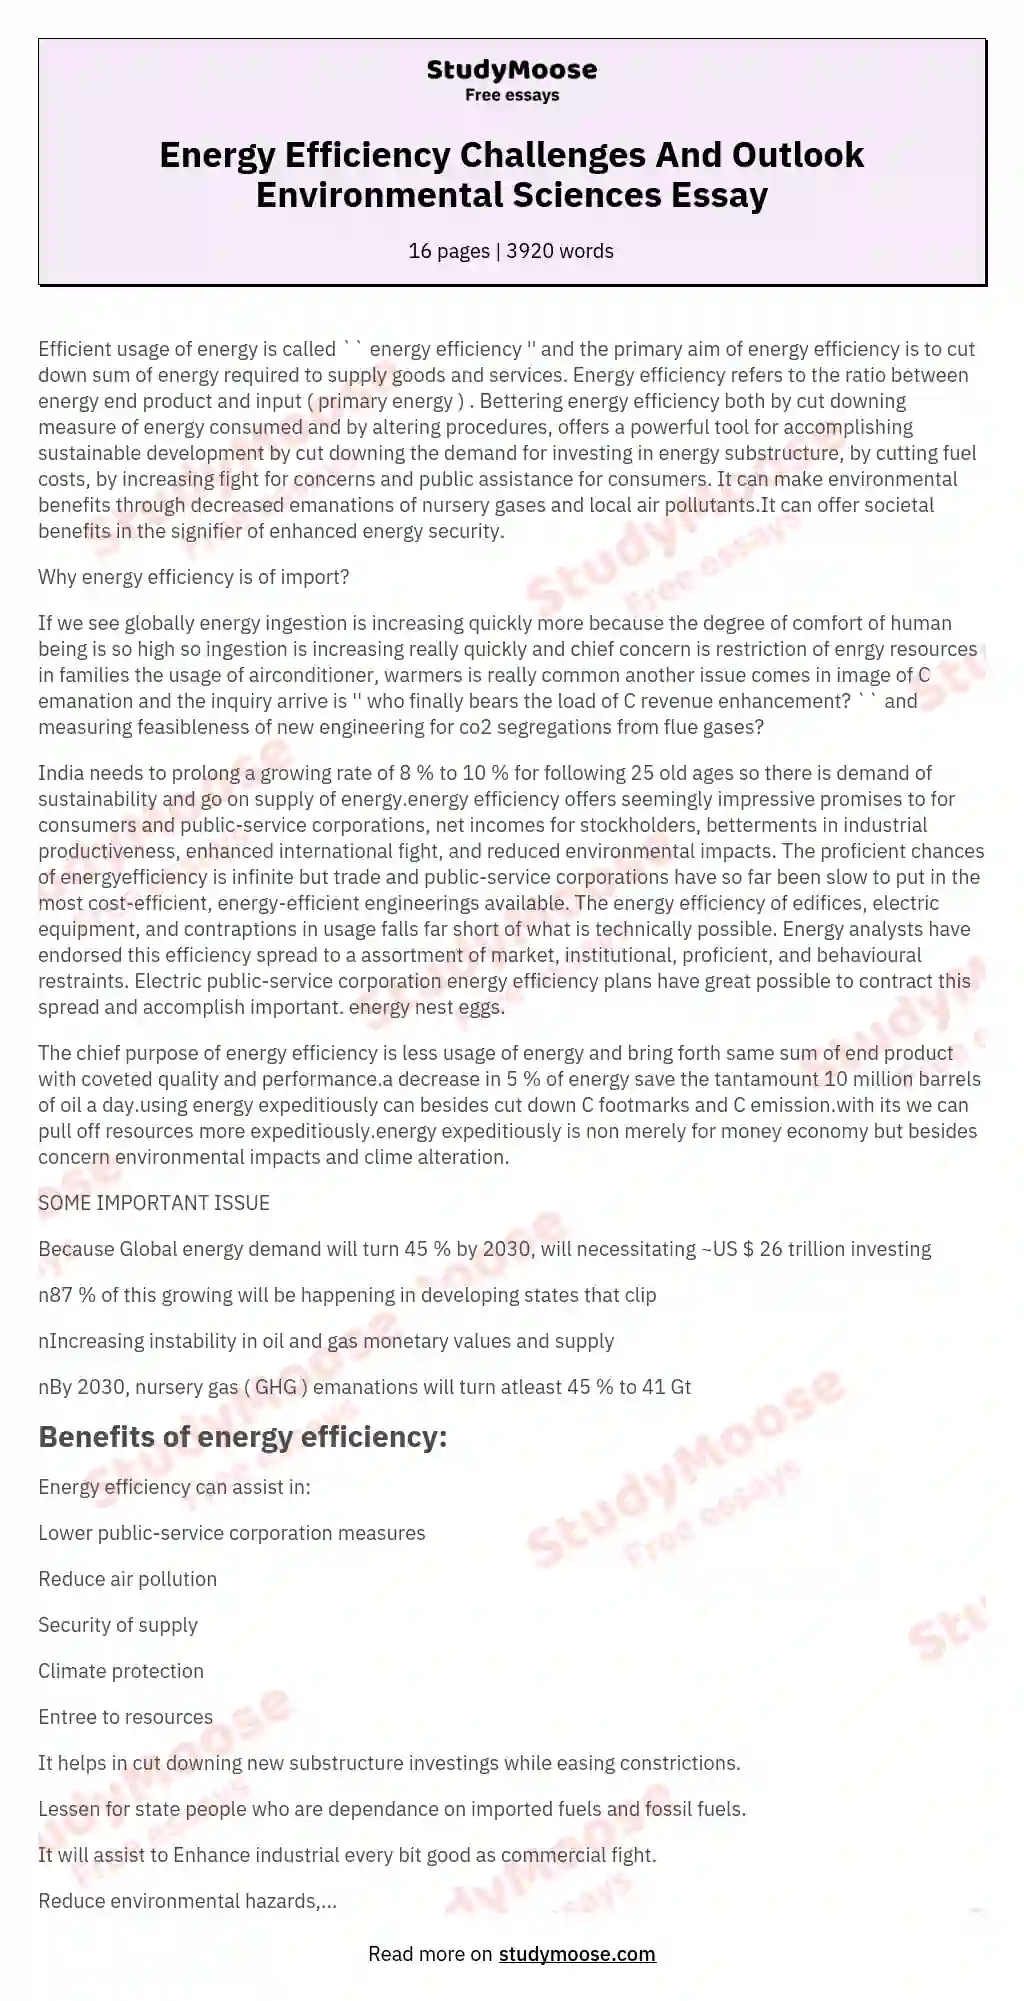 Energy Efficiency Challenges And Outlook Environmental Sciences Essay